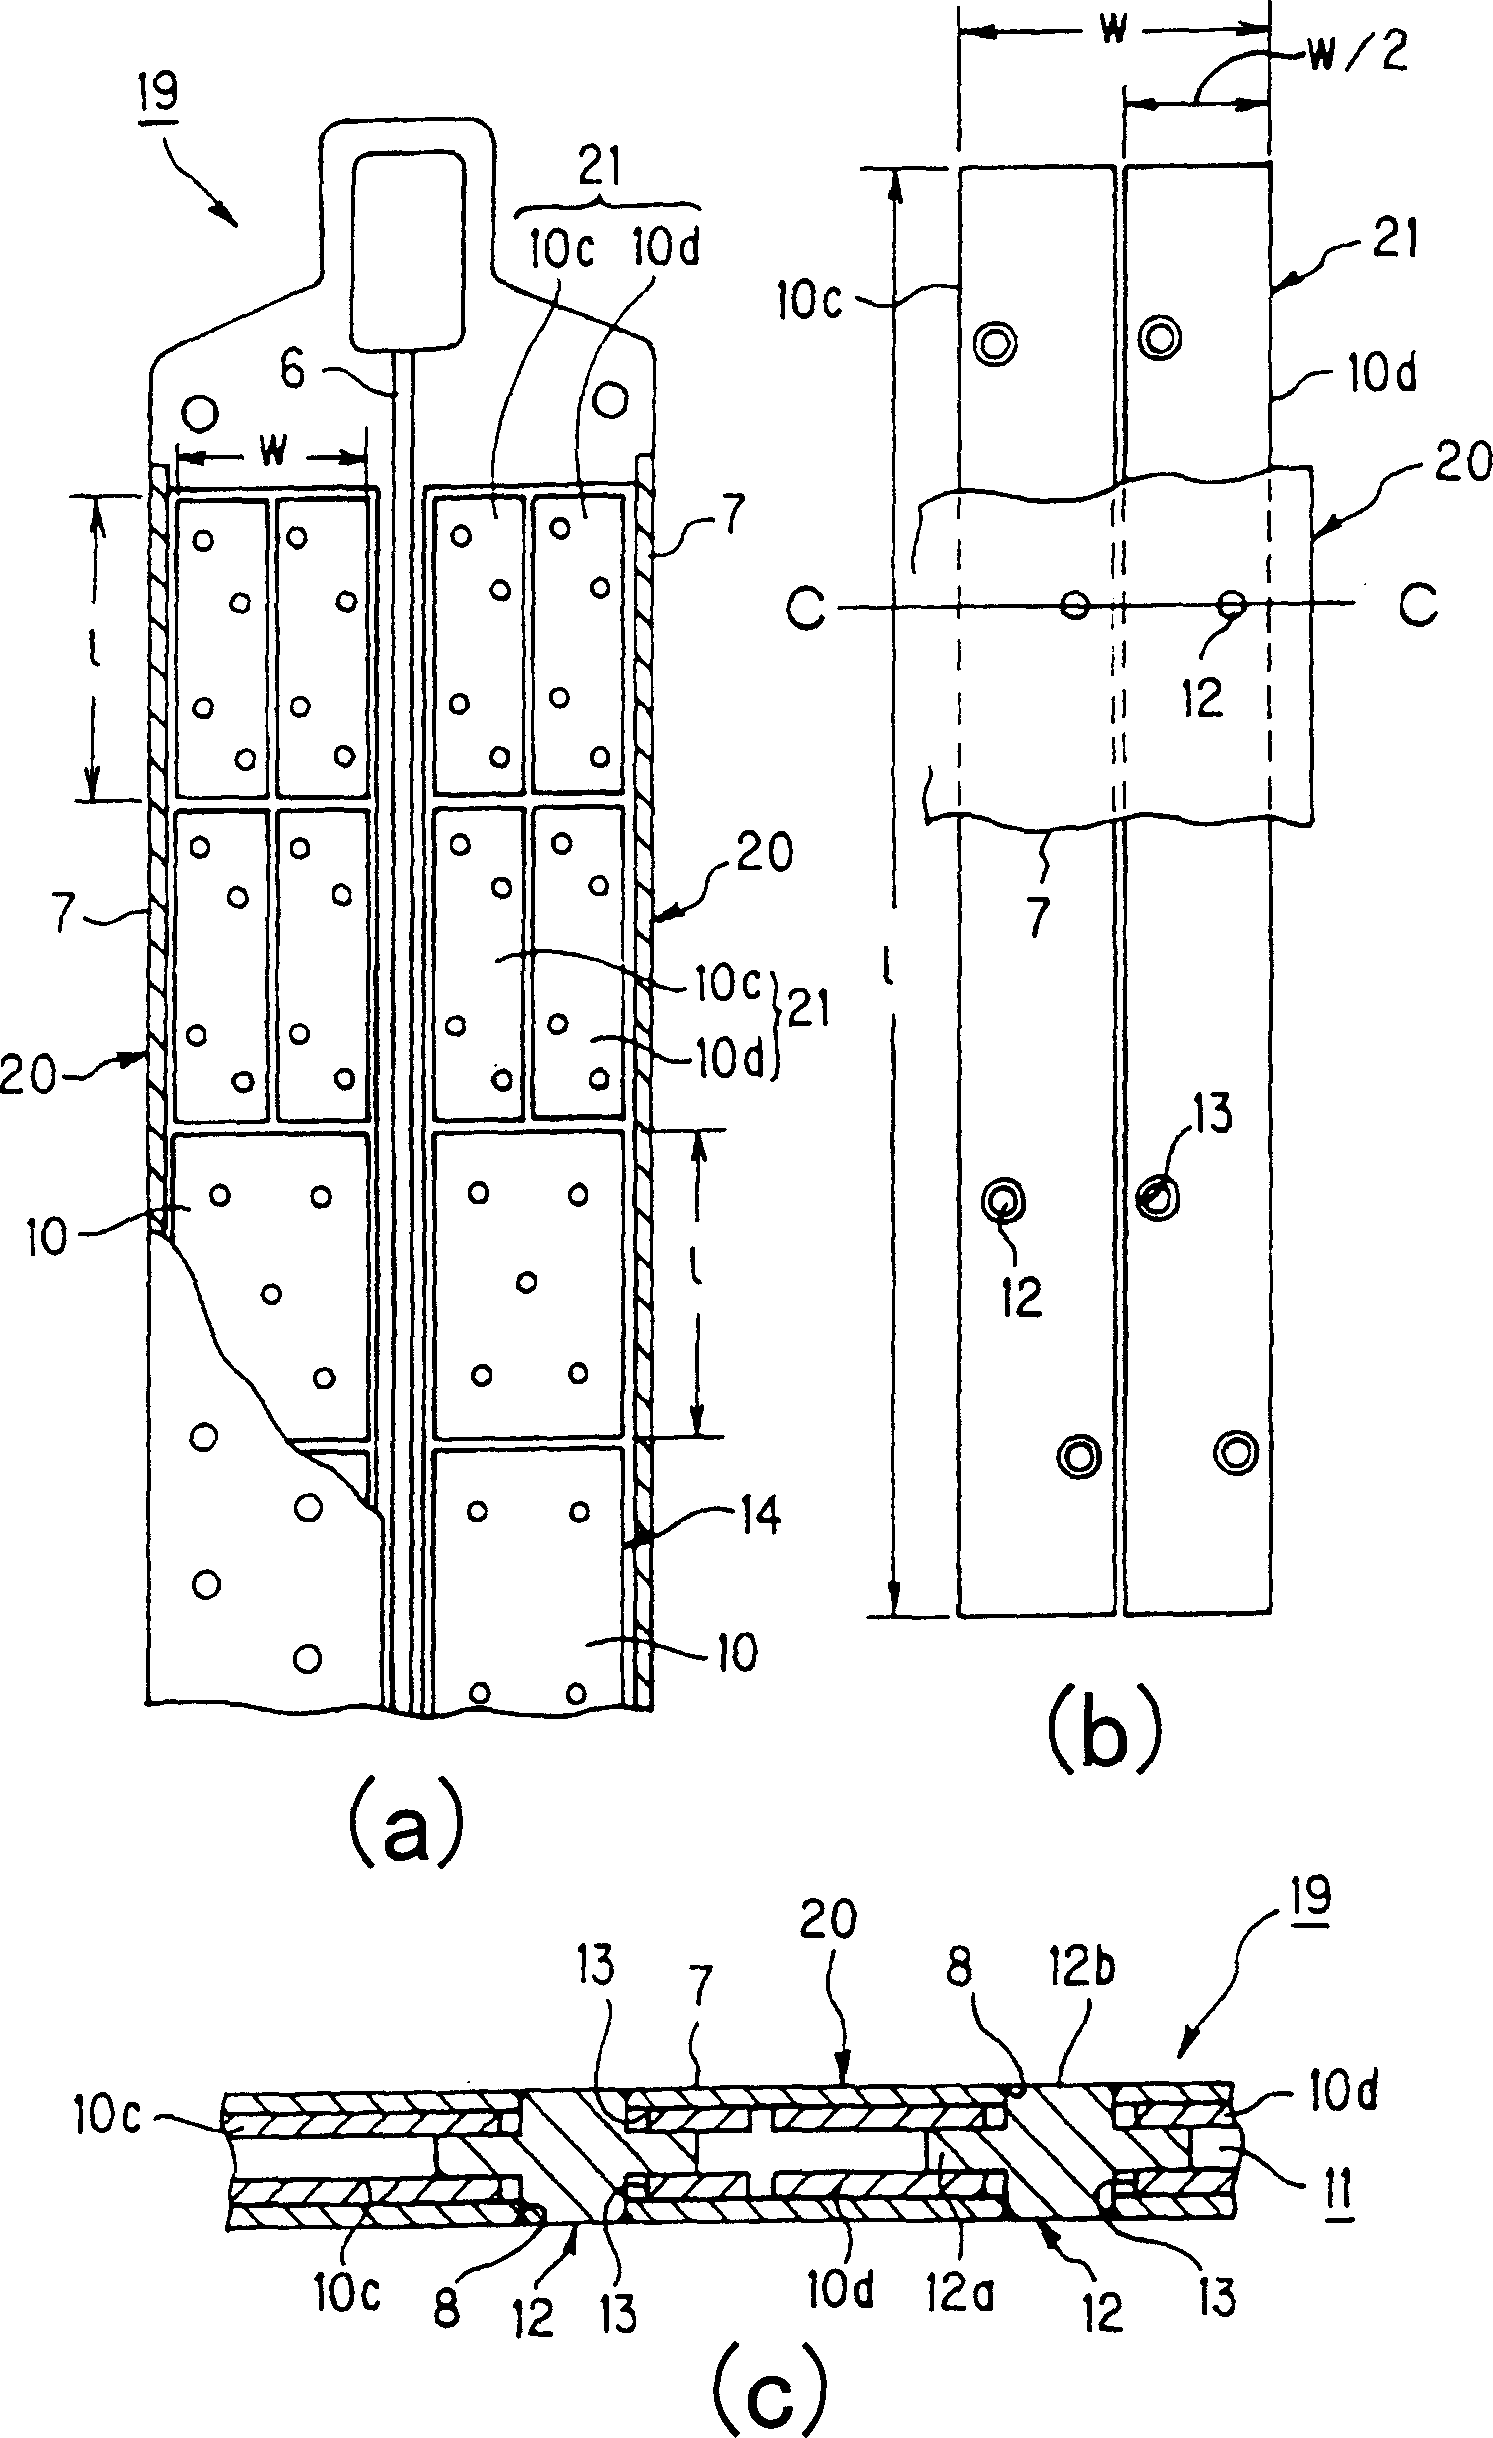 Control rod for nuclear reactor